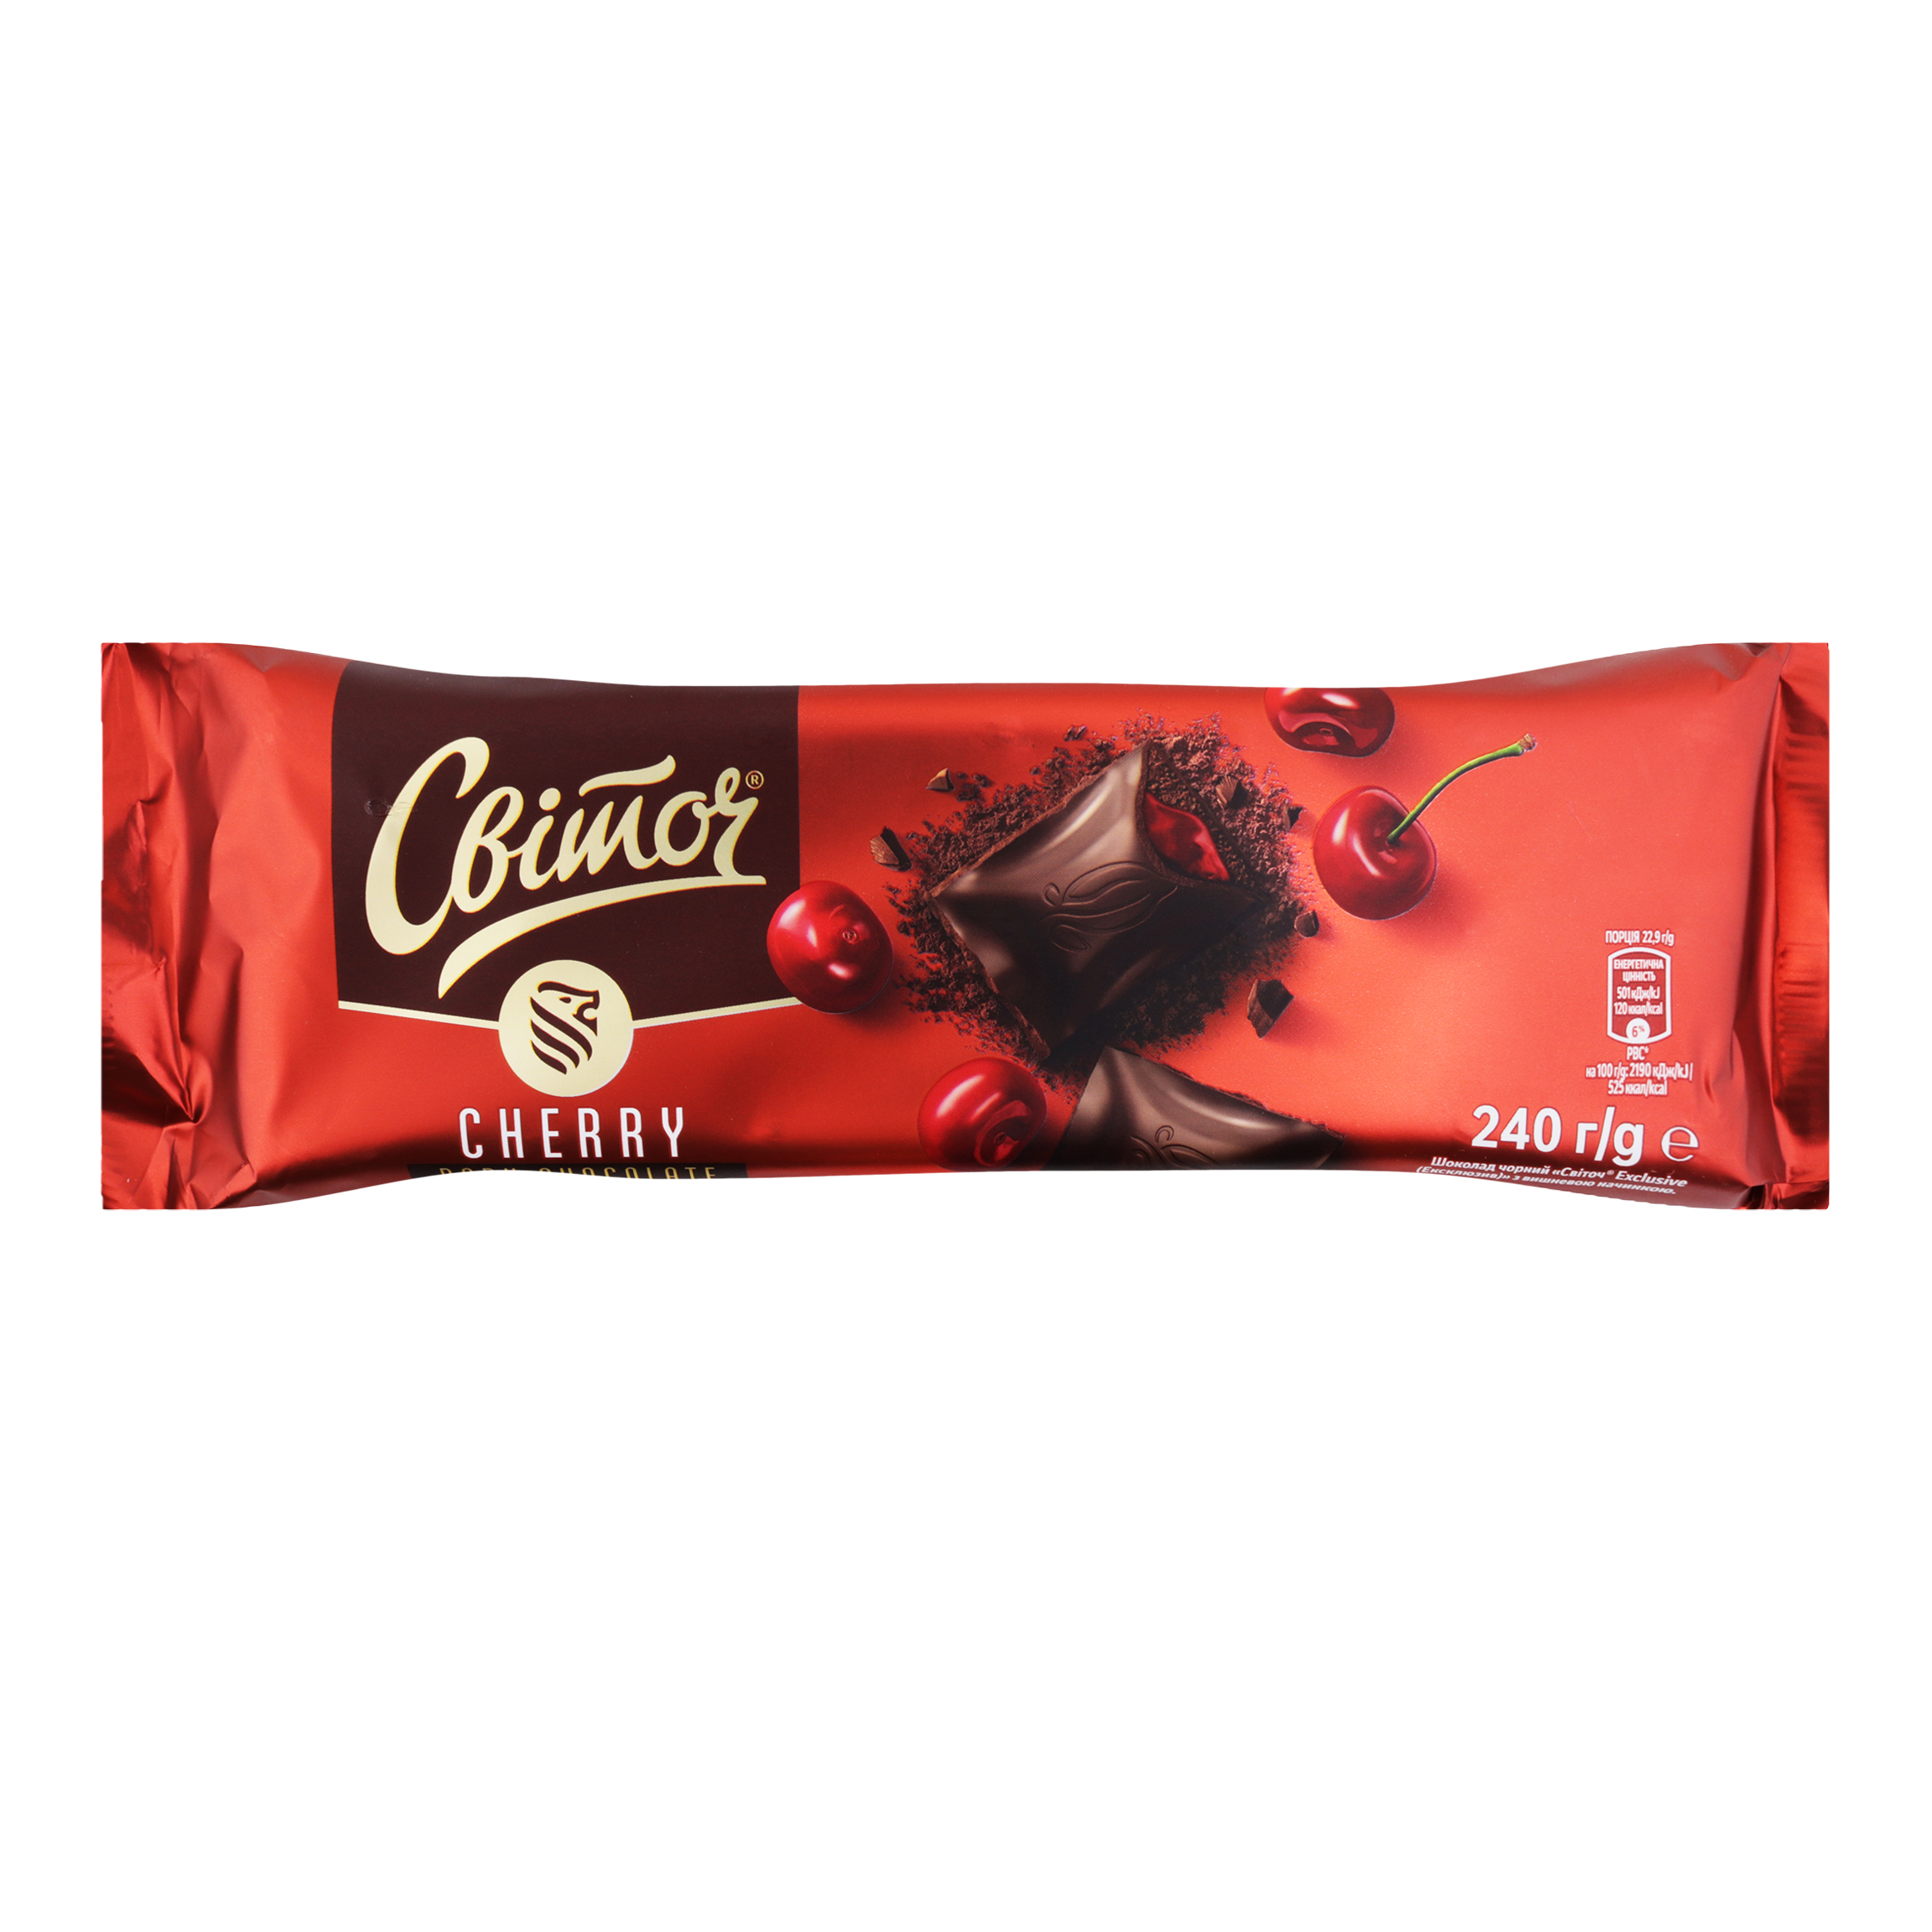 SVITOCH Exclusive dark chocolate with Cherry filling 240g